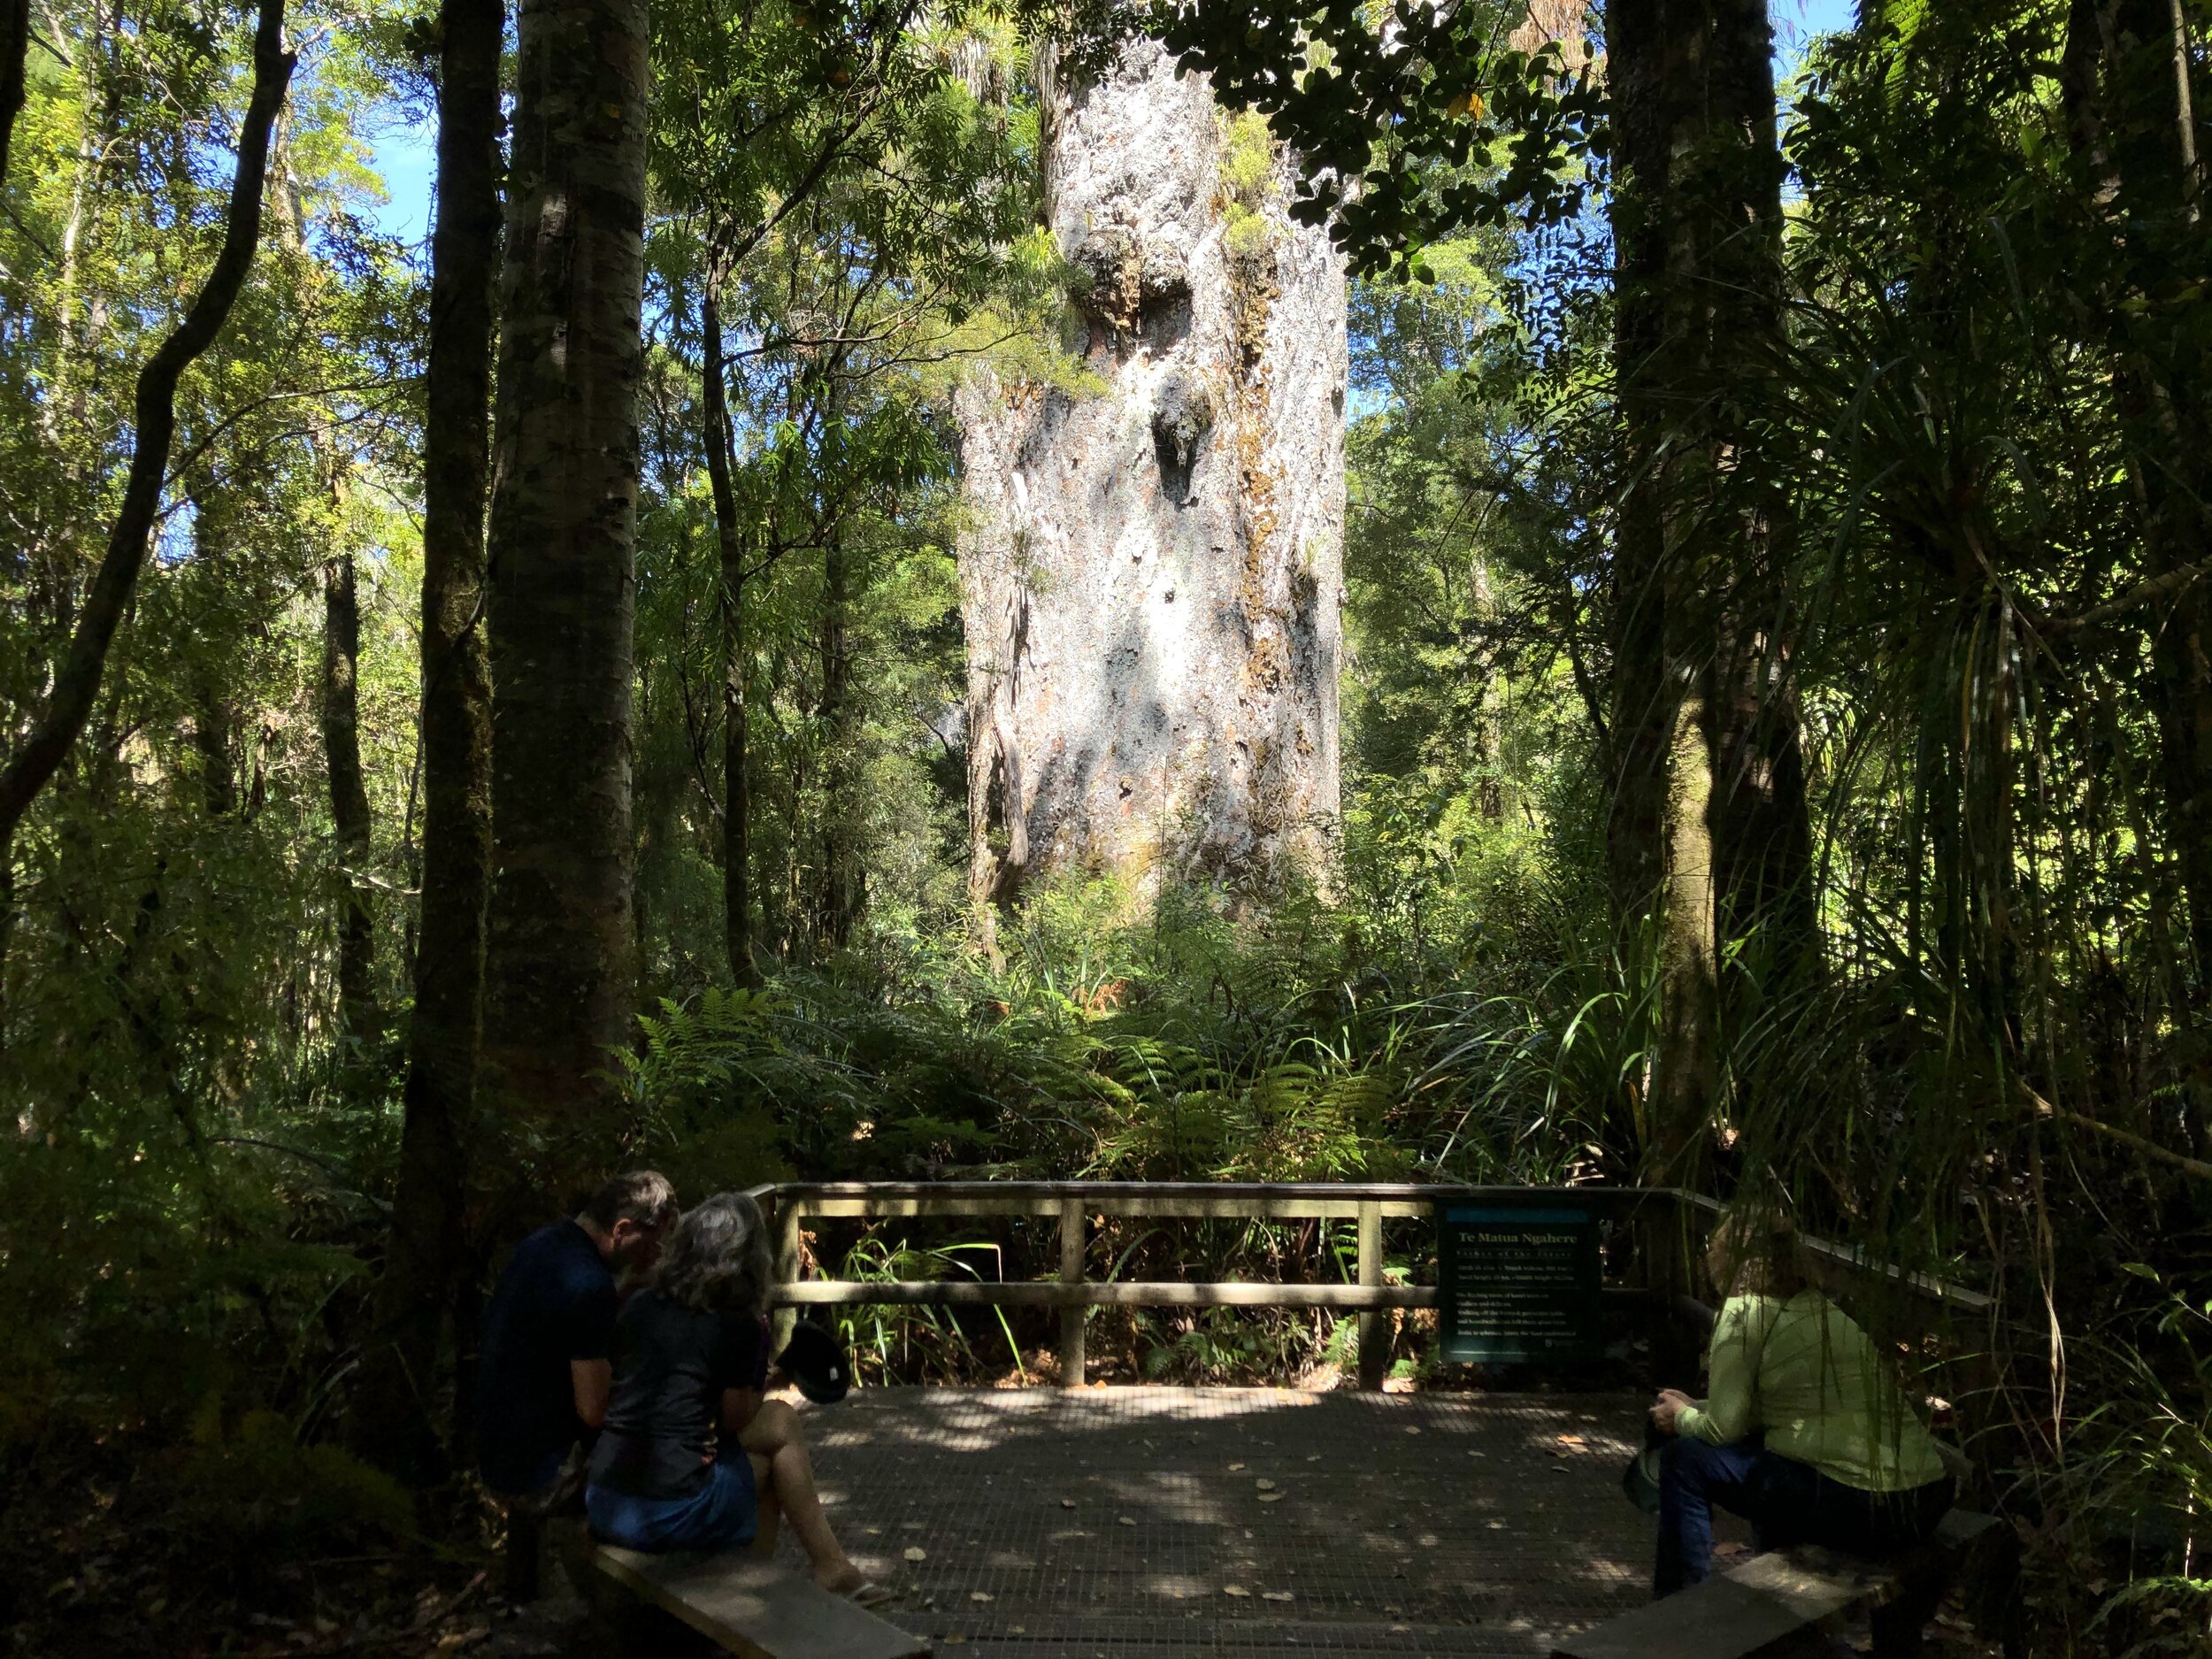  Te Matua Ngahere, “Father of the Forest” in the Maori language, the smaller of the two most famous specimens, has massive girth of 16.41 m (53.8 ft), with a trunk height of 10.21 m (34.5 ft) and a total height of 29.9 m (98.1 ft). The trunk volume i